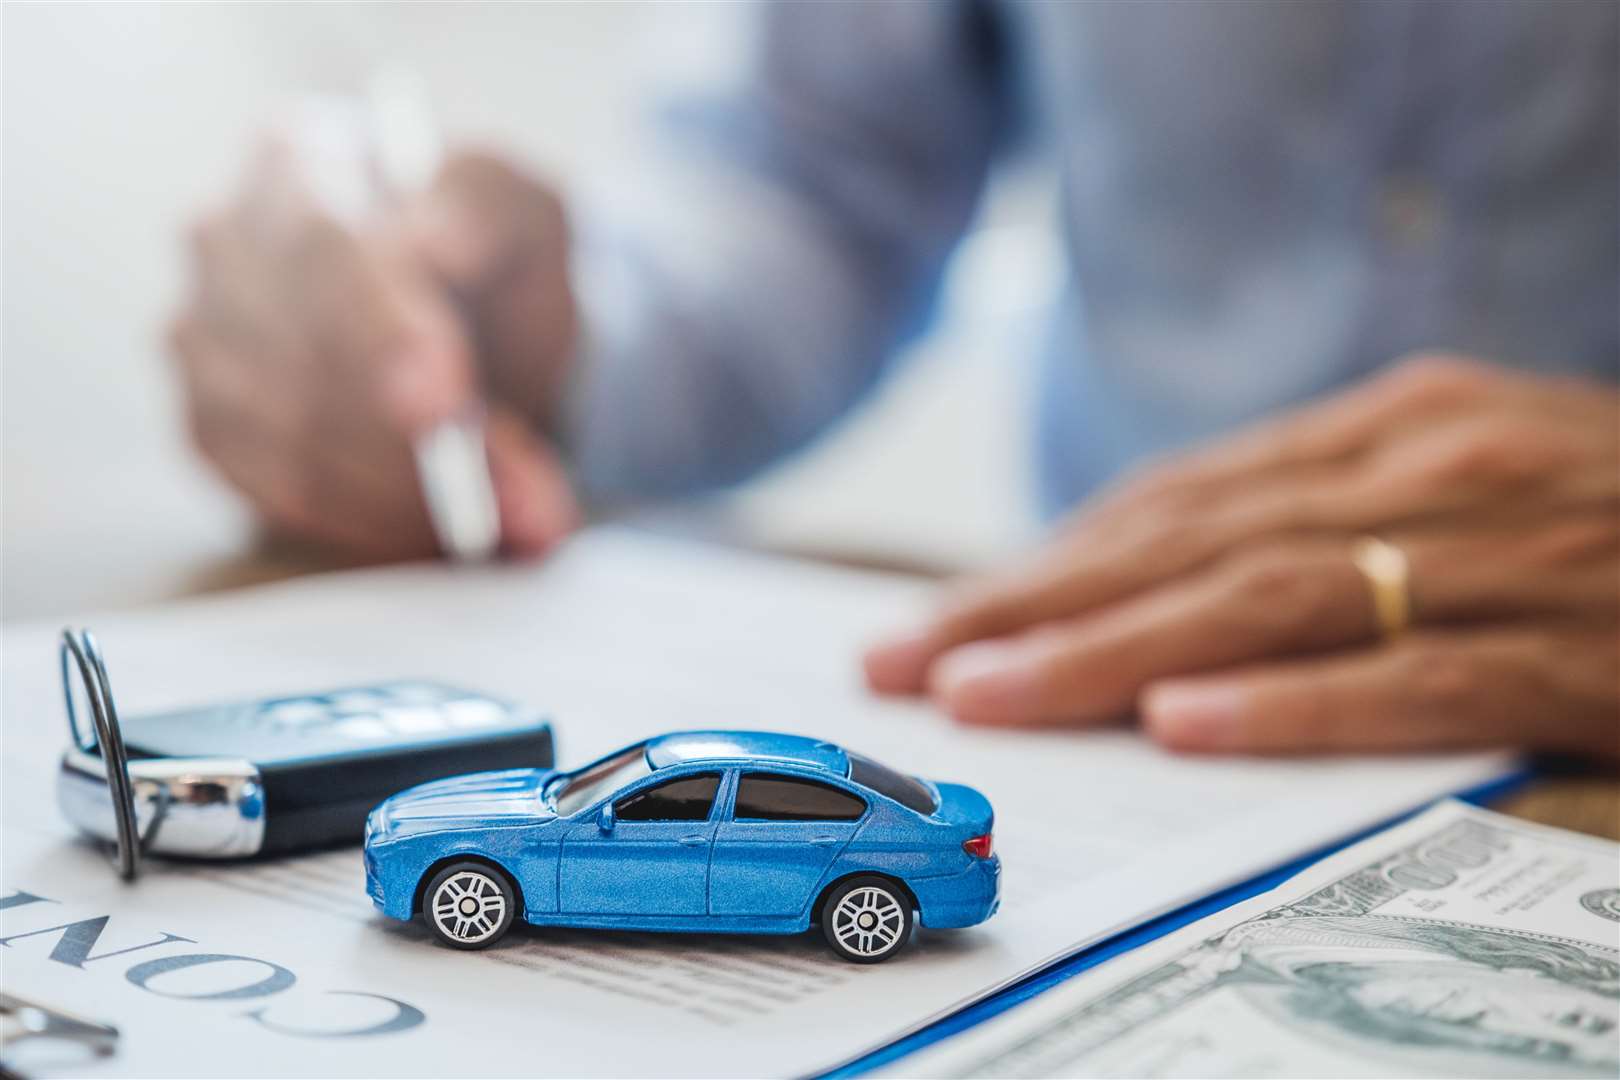 Remember to keep your car insurer up to date with any changes to your circumstances.